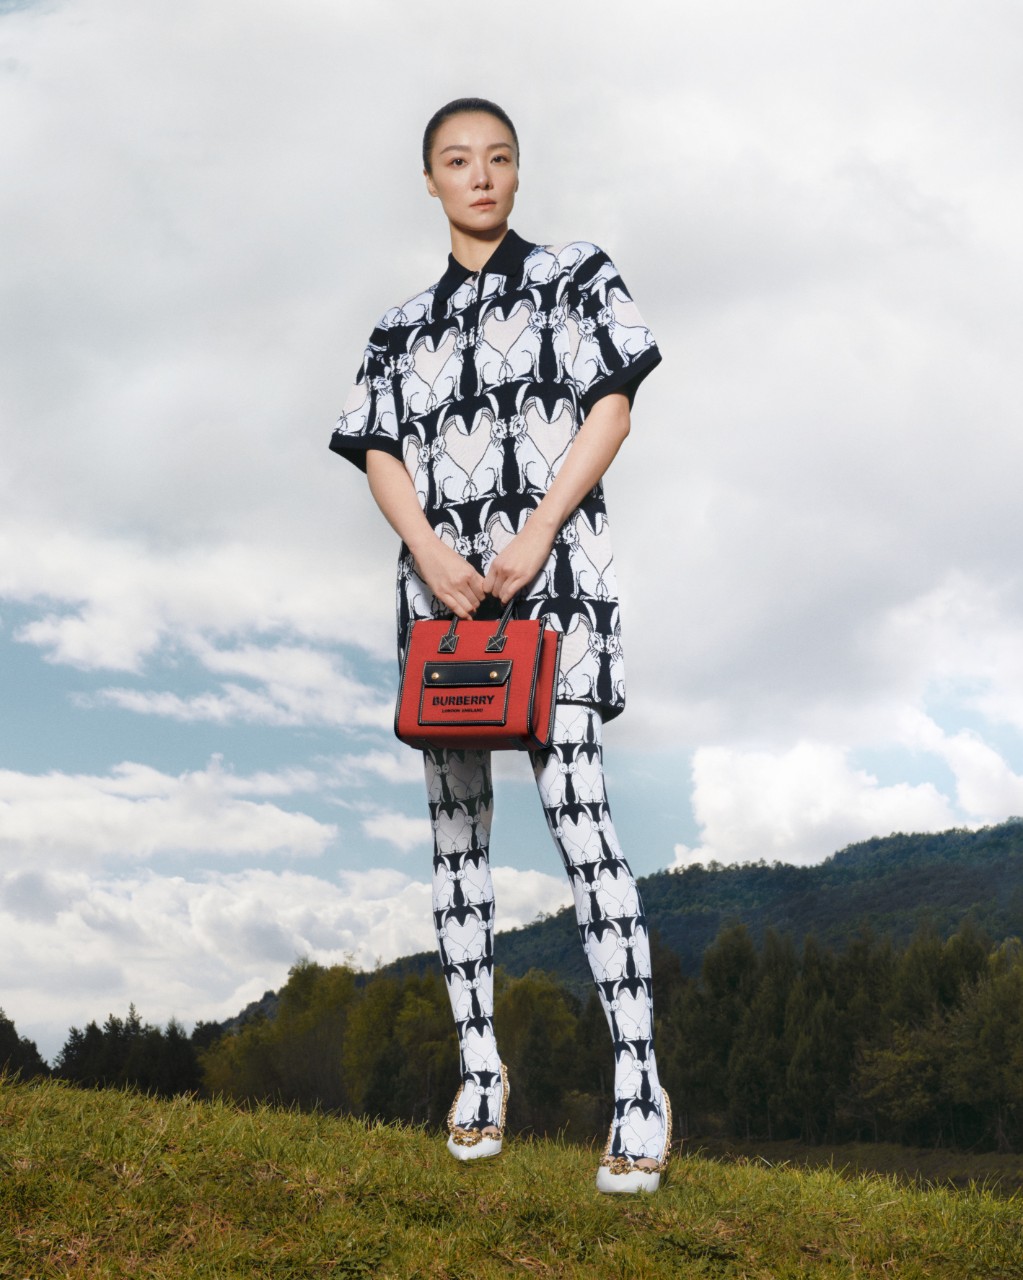 LOEWE Honors Chinese New Year With This Rabbit Themed Collection